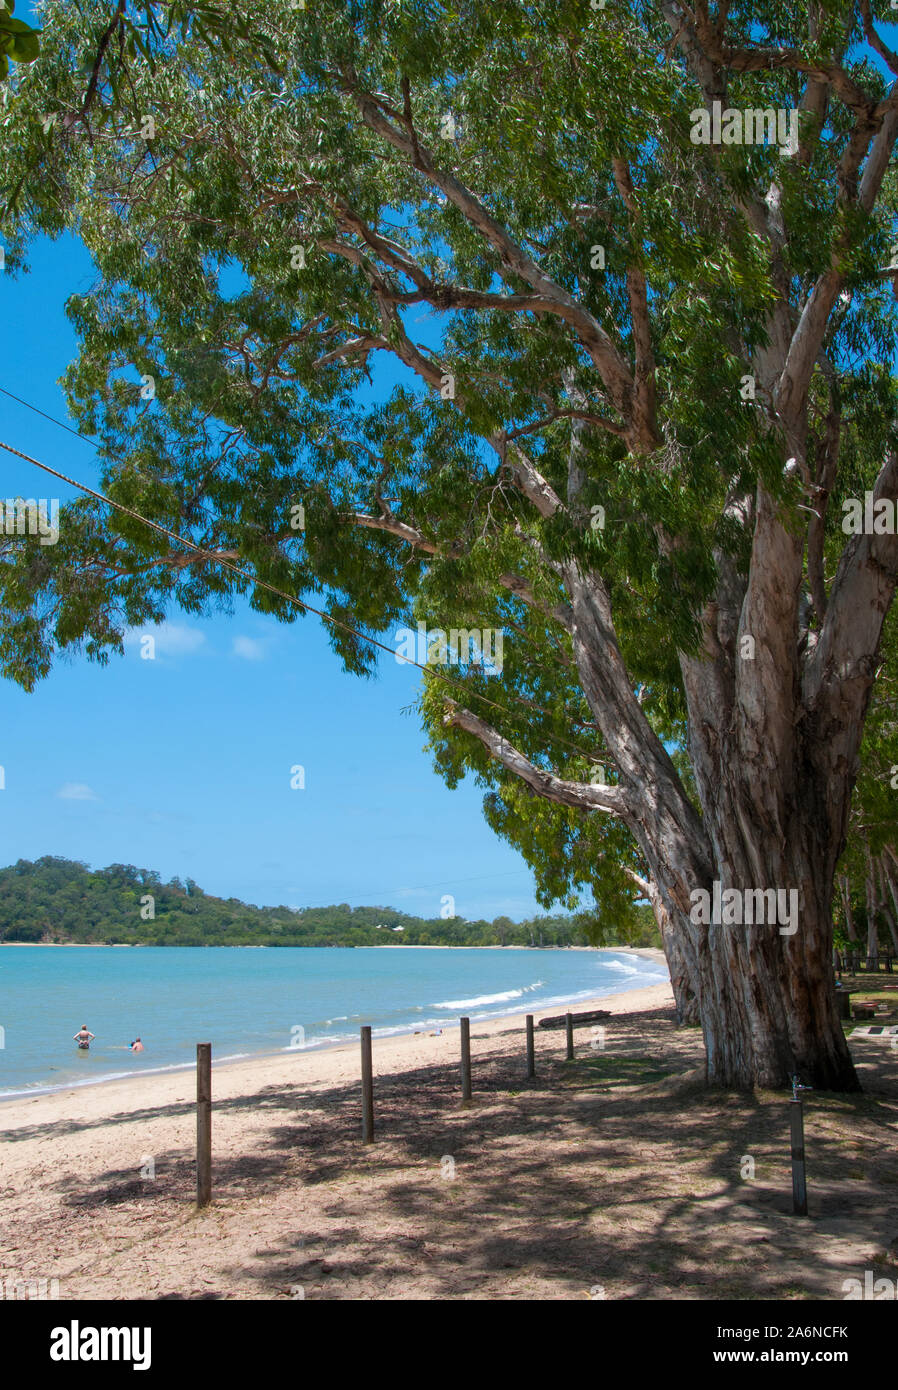 Mature paperbarks line the shore at Kewarra Beach, north of Cairns, North Queensland, Australia Stock Photo